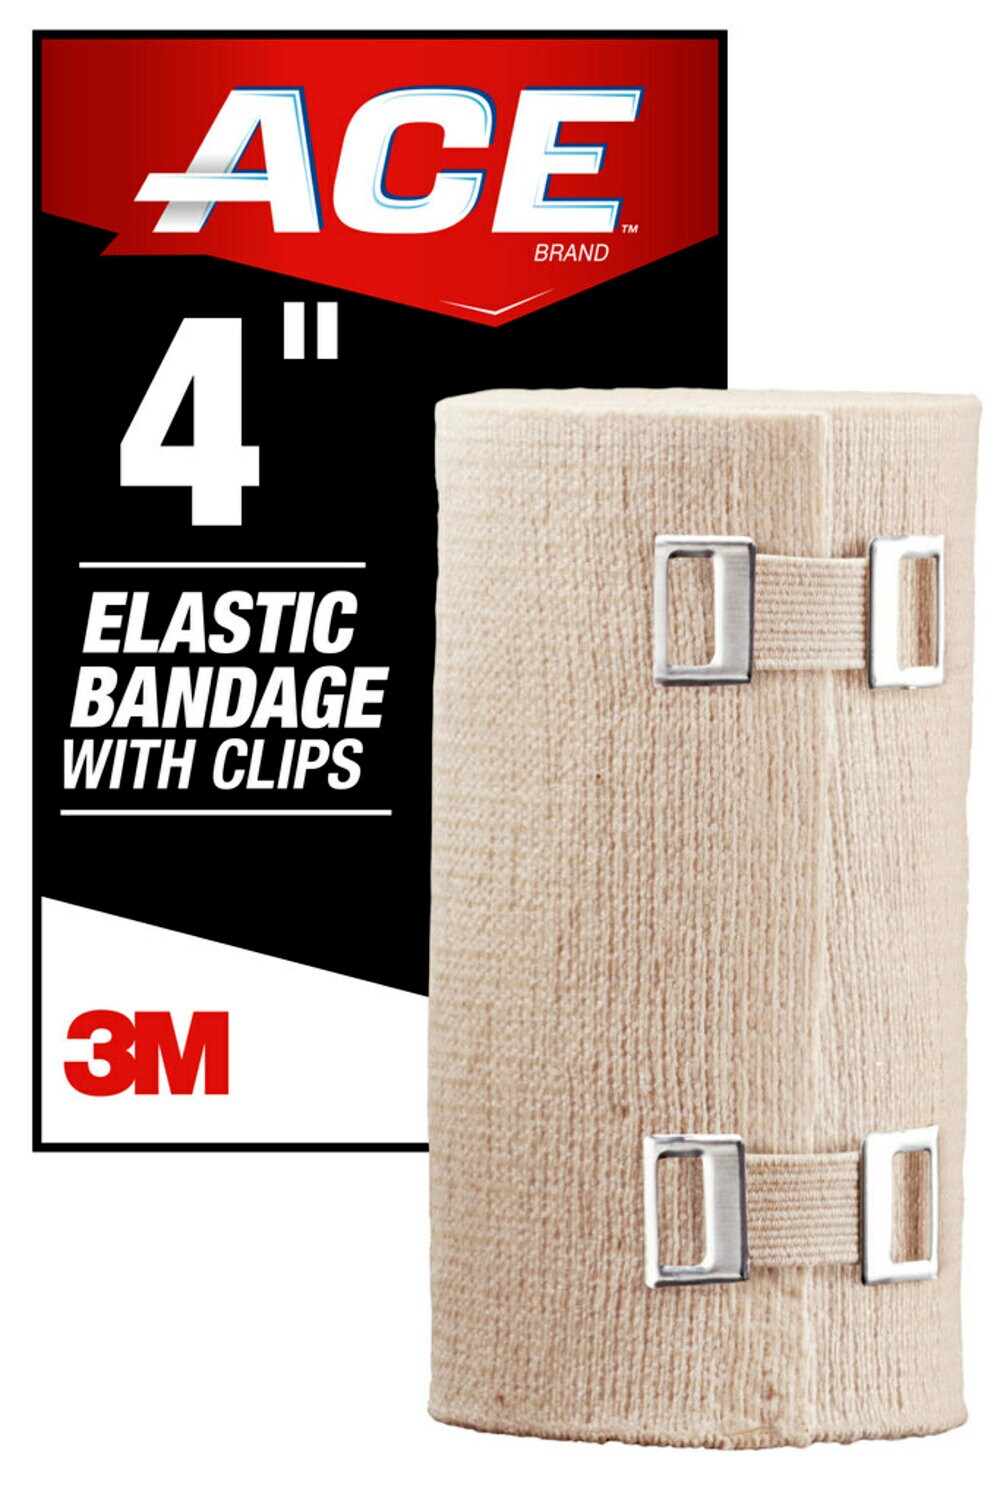 7010370661 - ACE Brand Elastic Bandage w/clips 207313, 4 in